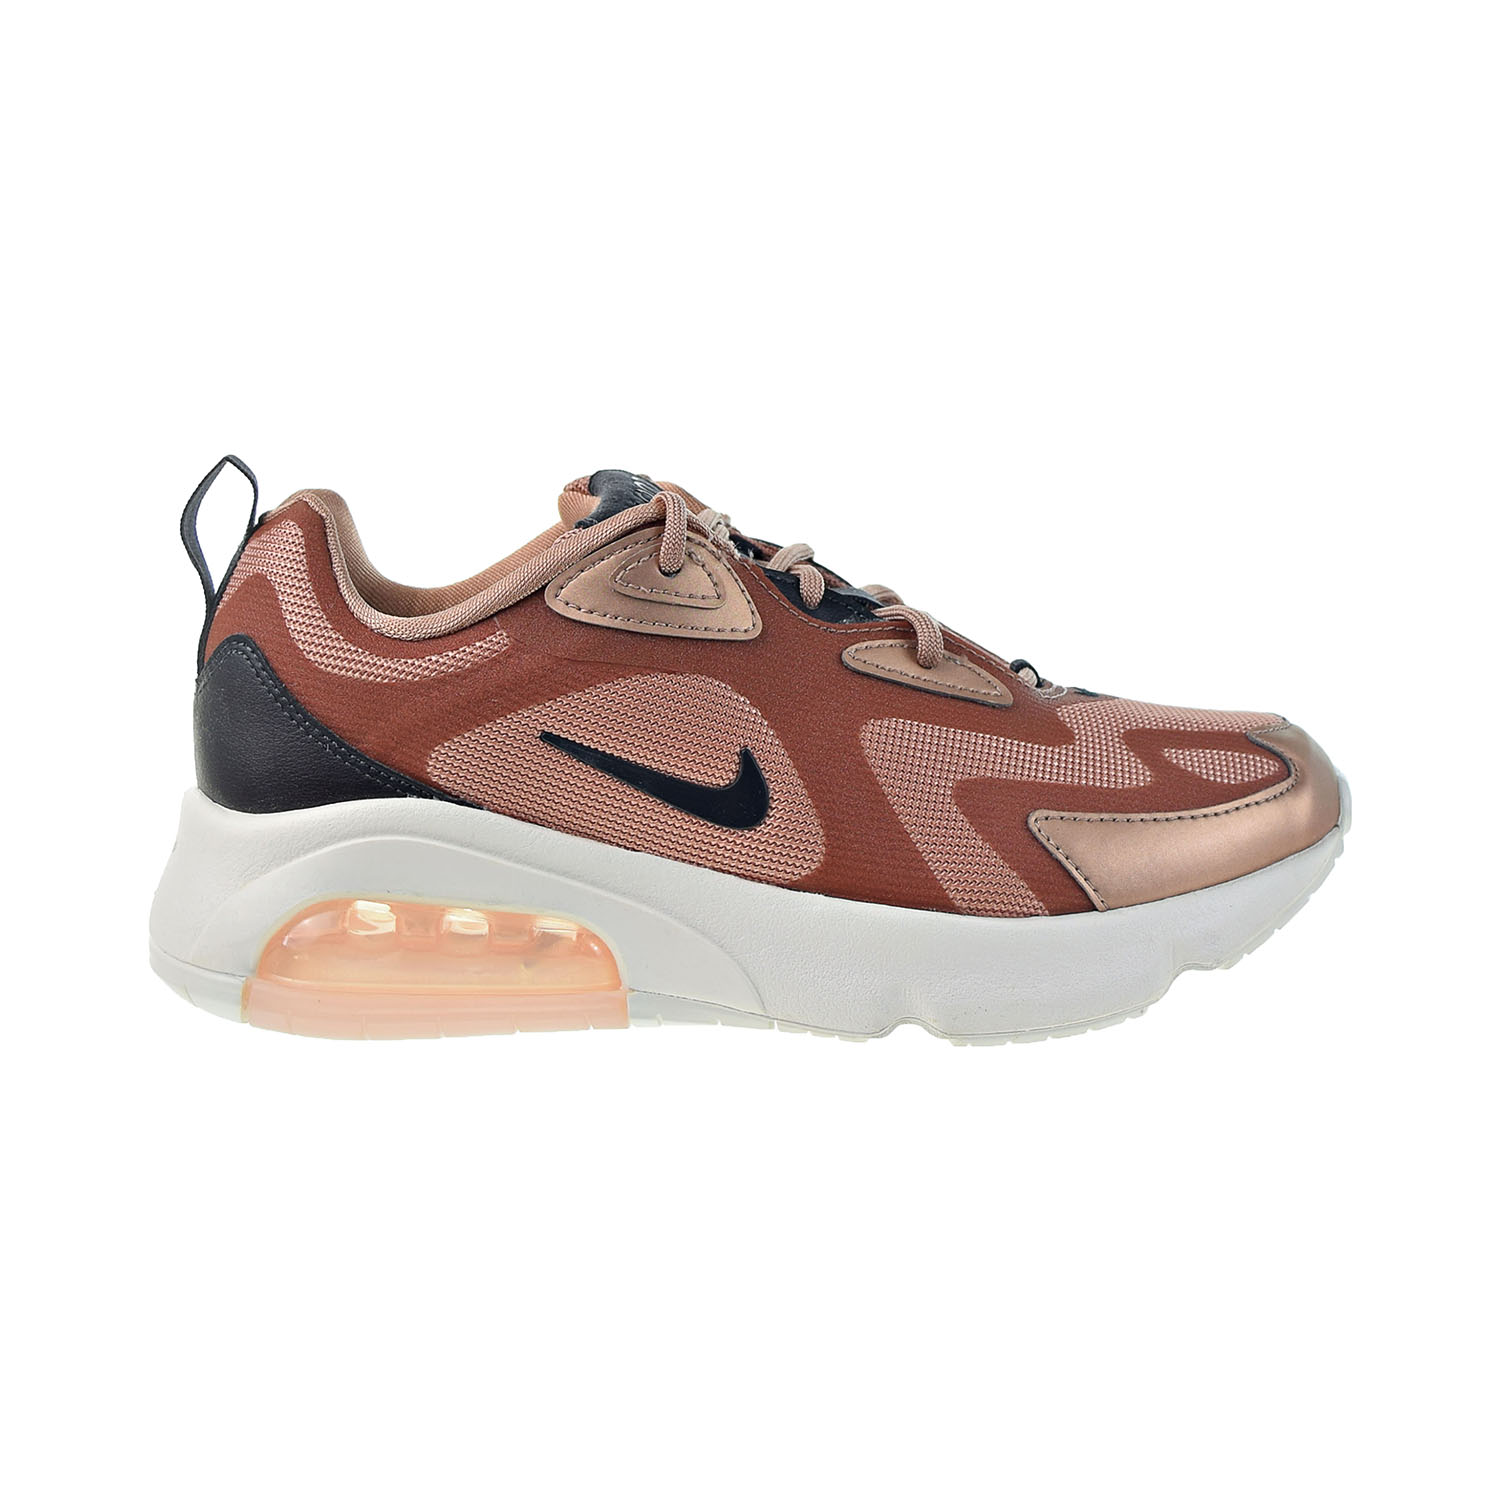 Nike Air Max 200 "Holiday Sparkle" Women's Shoes Metallic Red-Bronze ct1185-900 - image 1 of 6